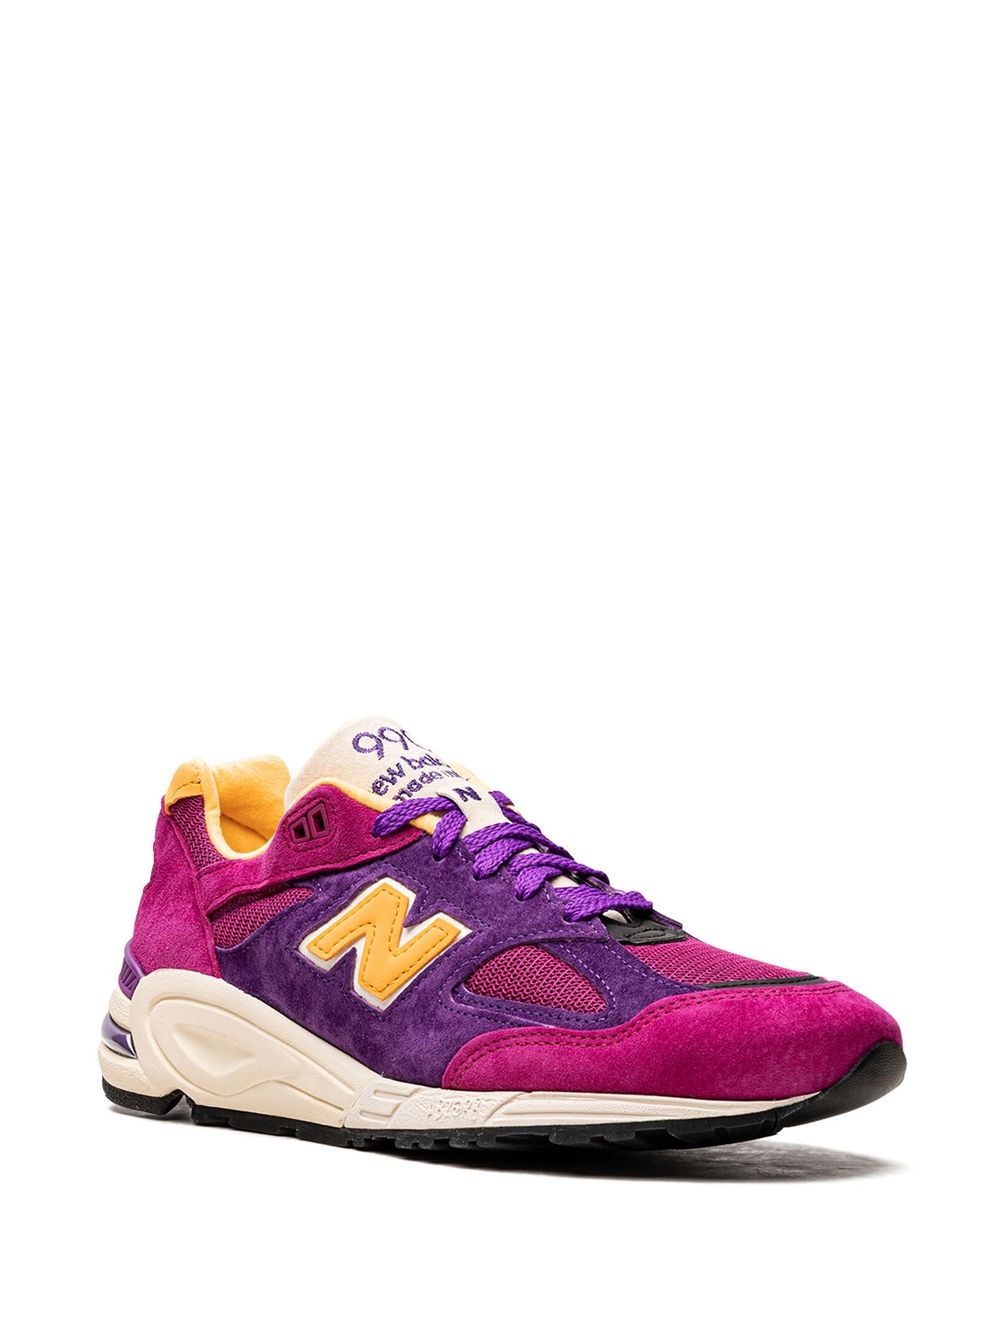 Shop New Balance 990v2 "pink/purple" Sneakers